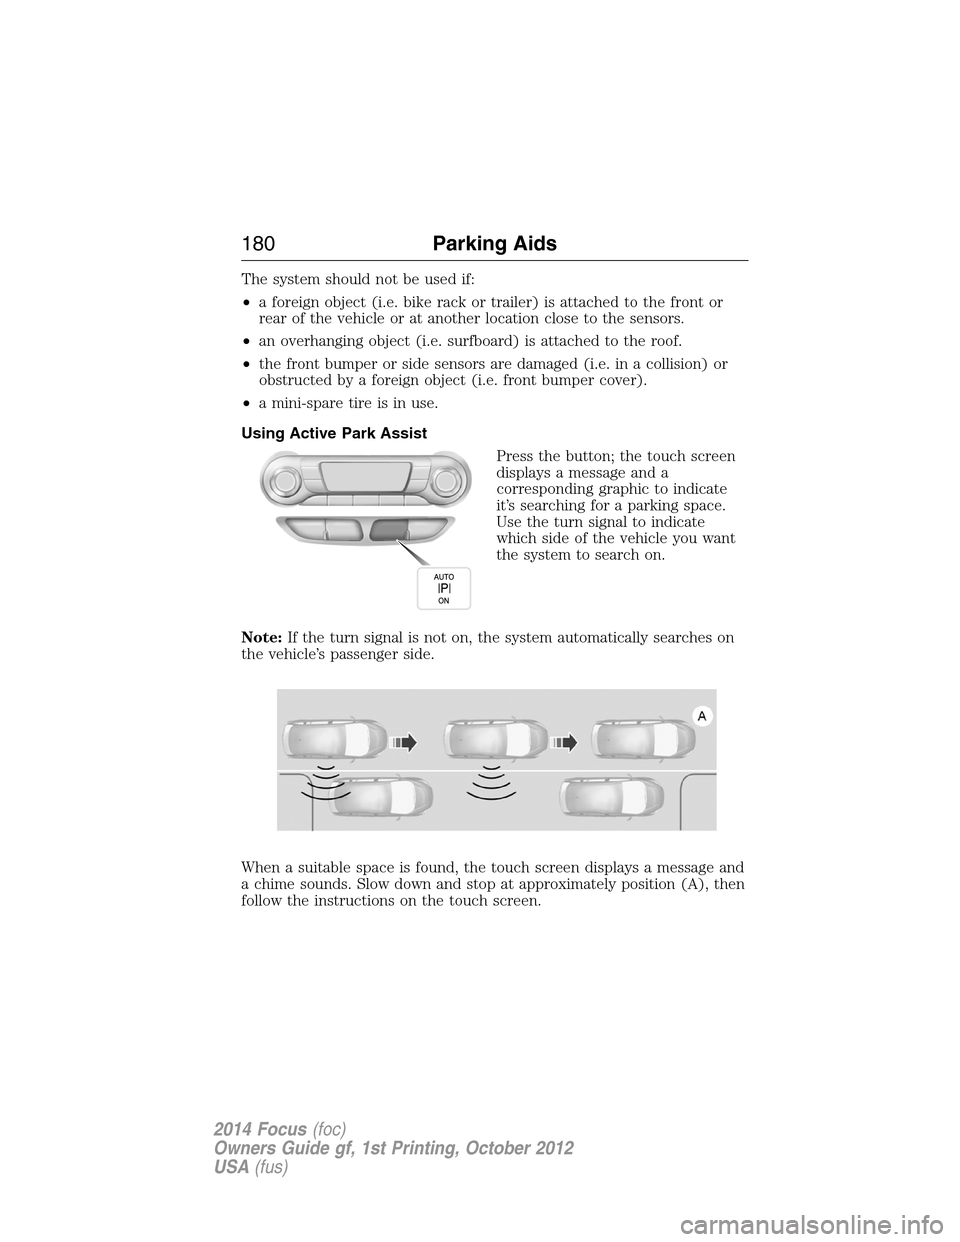 FORD FOCUS 2014 3.G Owners Manual The system should not be used if:
•a foreign object (i.e. bike rack or trailer) is attached to the front or
rear of the vehicle or at another location close to the sensors.
•an overhanging object 